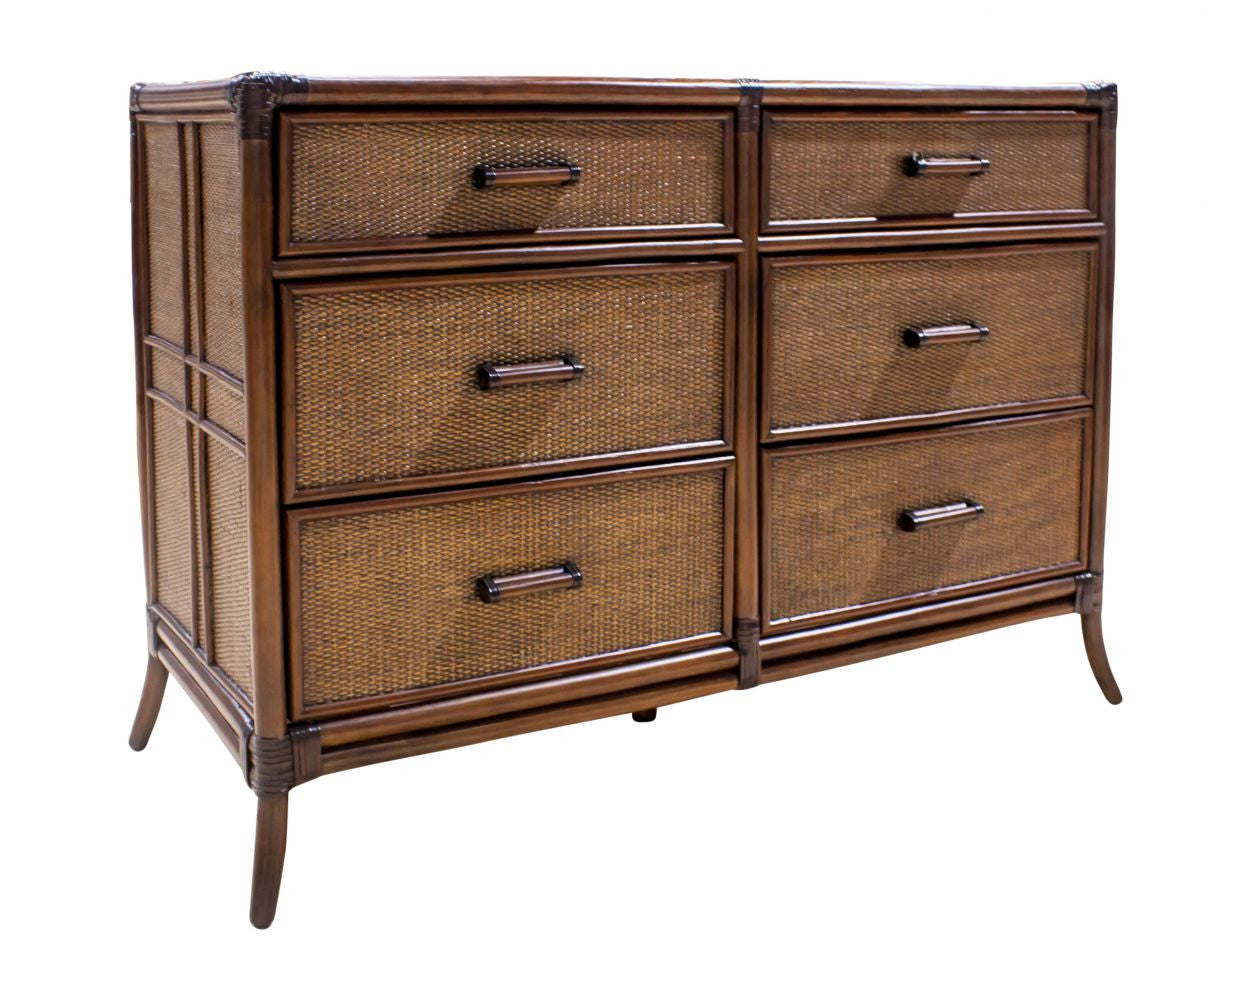 Hospitality Rattan Palm Cove 6-Drawer Dresser with Glass